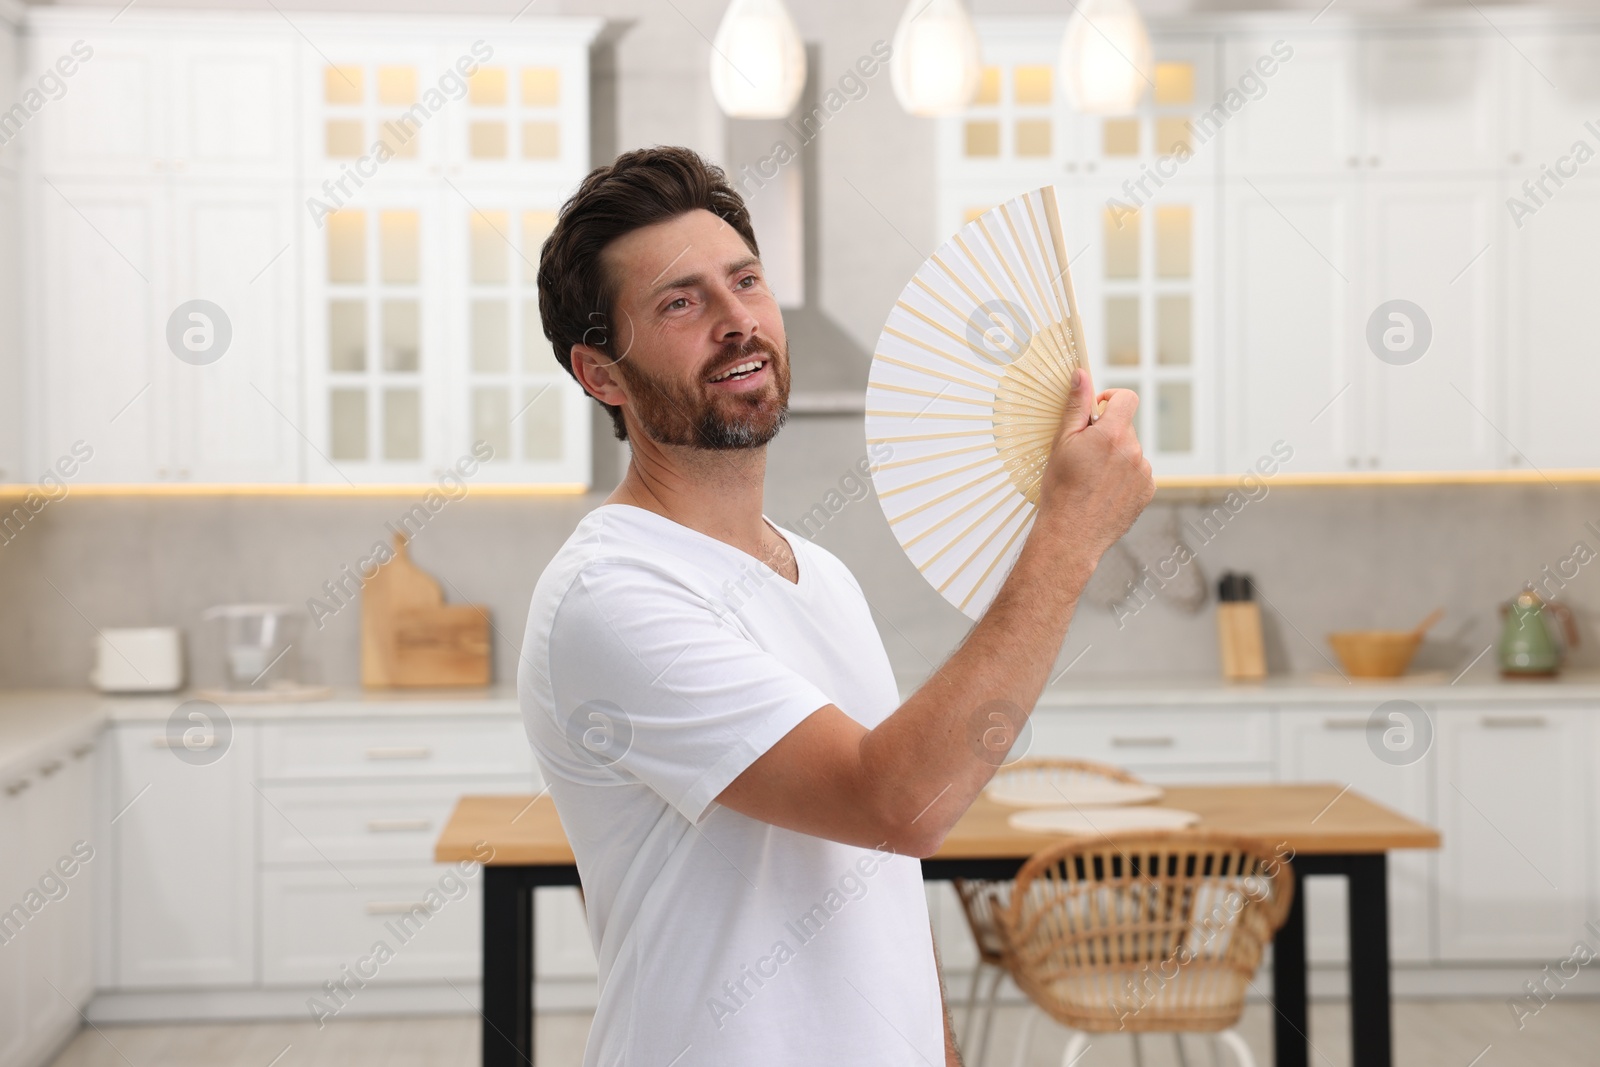 Photo of Bearded man waving white hand fan to cool himself in kitchen